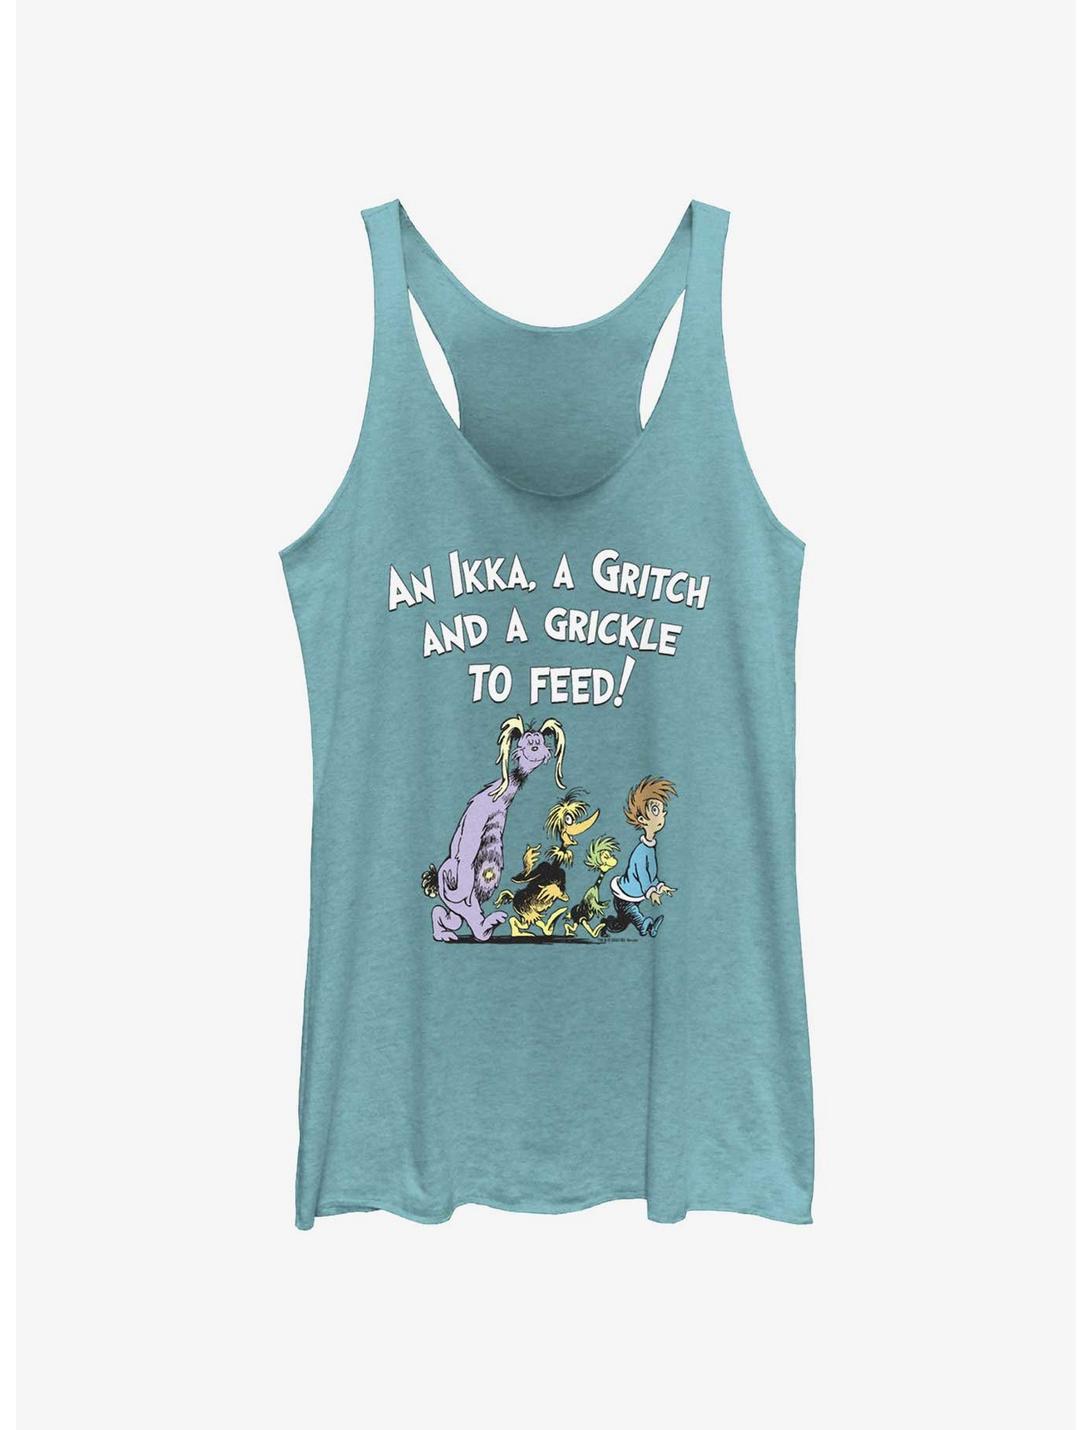 Dr. Seuss's The Bippolo Seed & Other Lost Stories Ikka Gritch Grickle To Feed Womens Tank Top, TAHI BLUE, hi-res